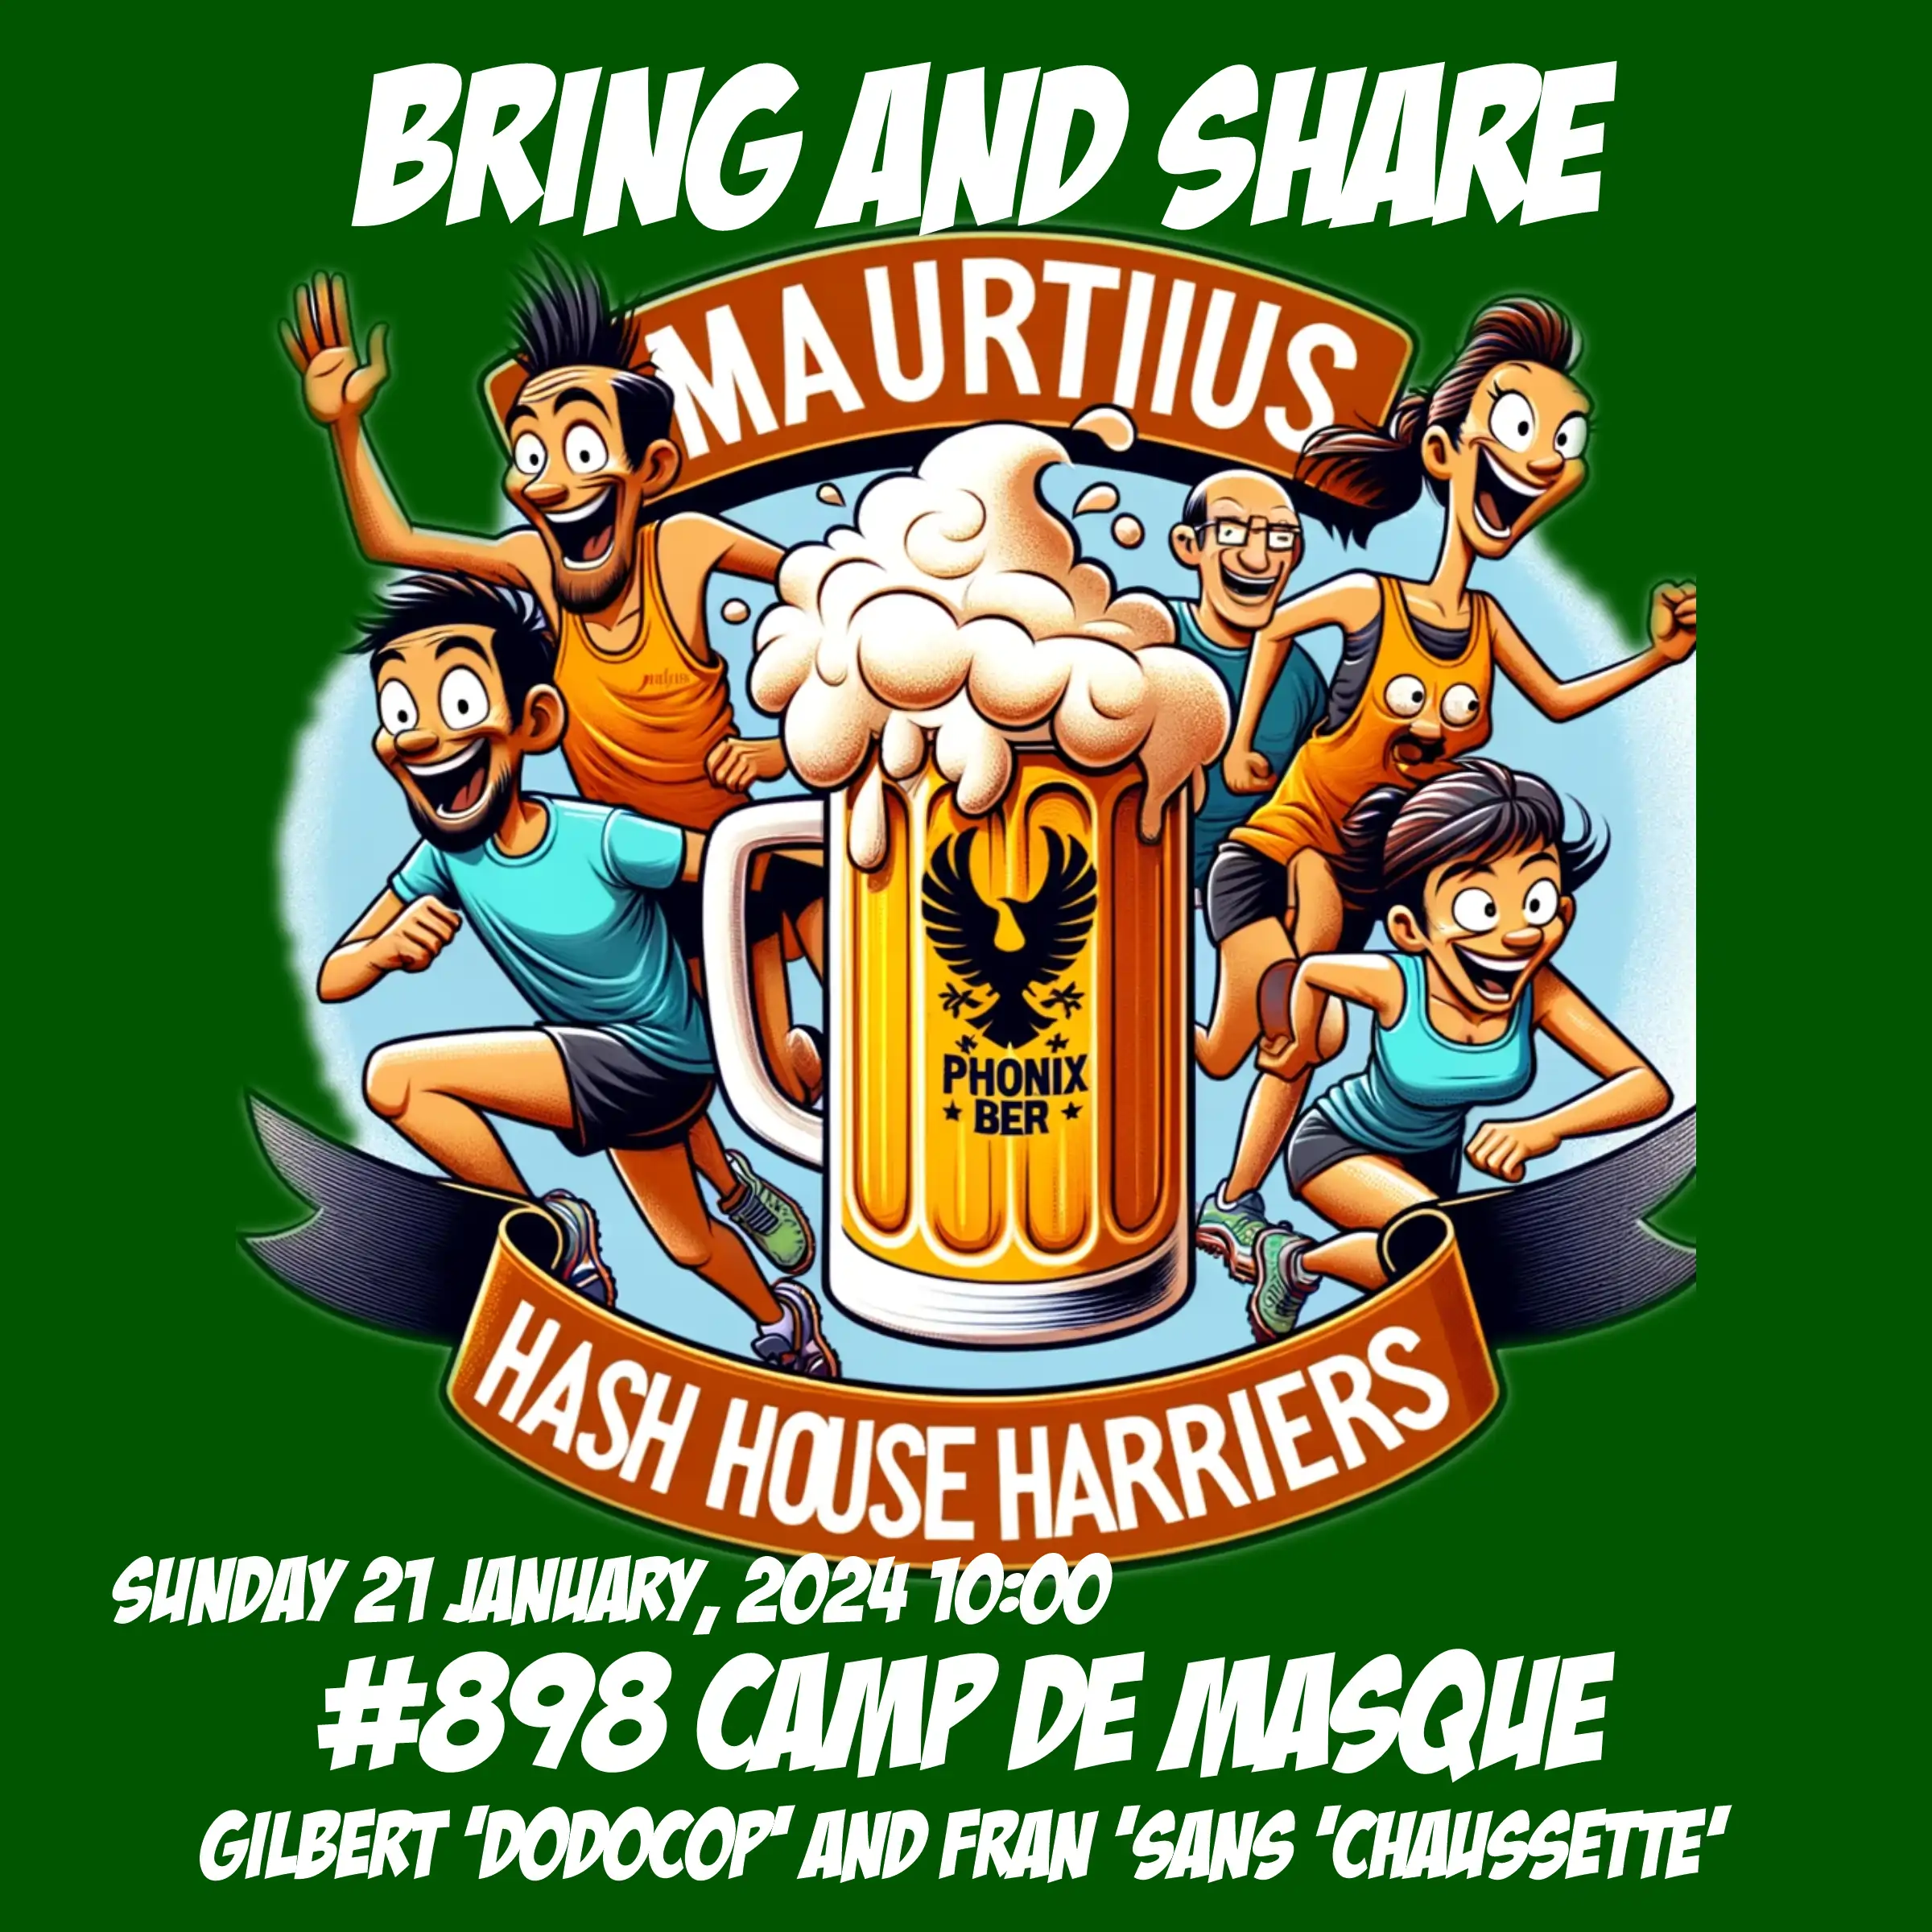 HASH HOUSE harriers Mauritius 898 run bring and share